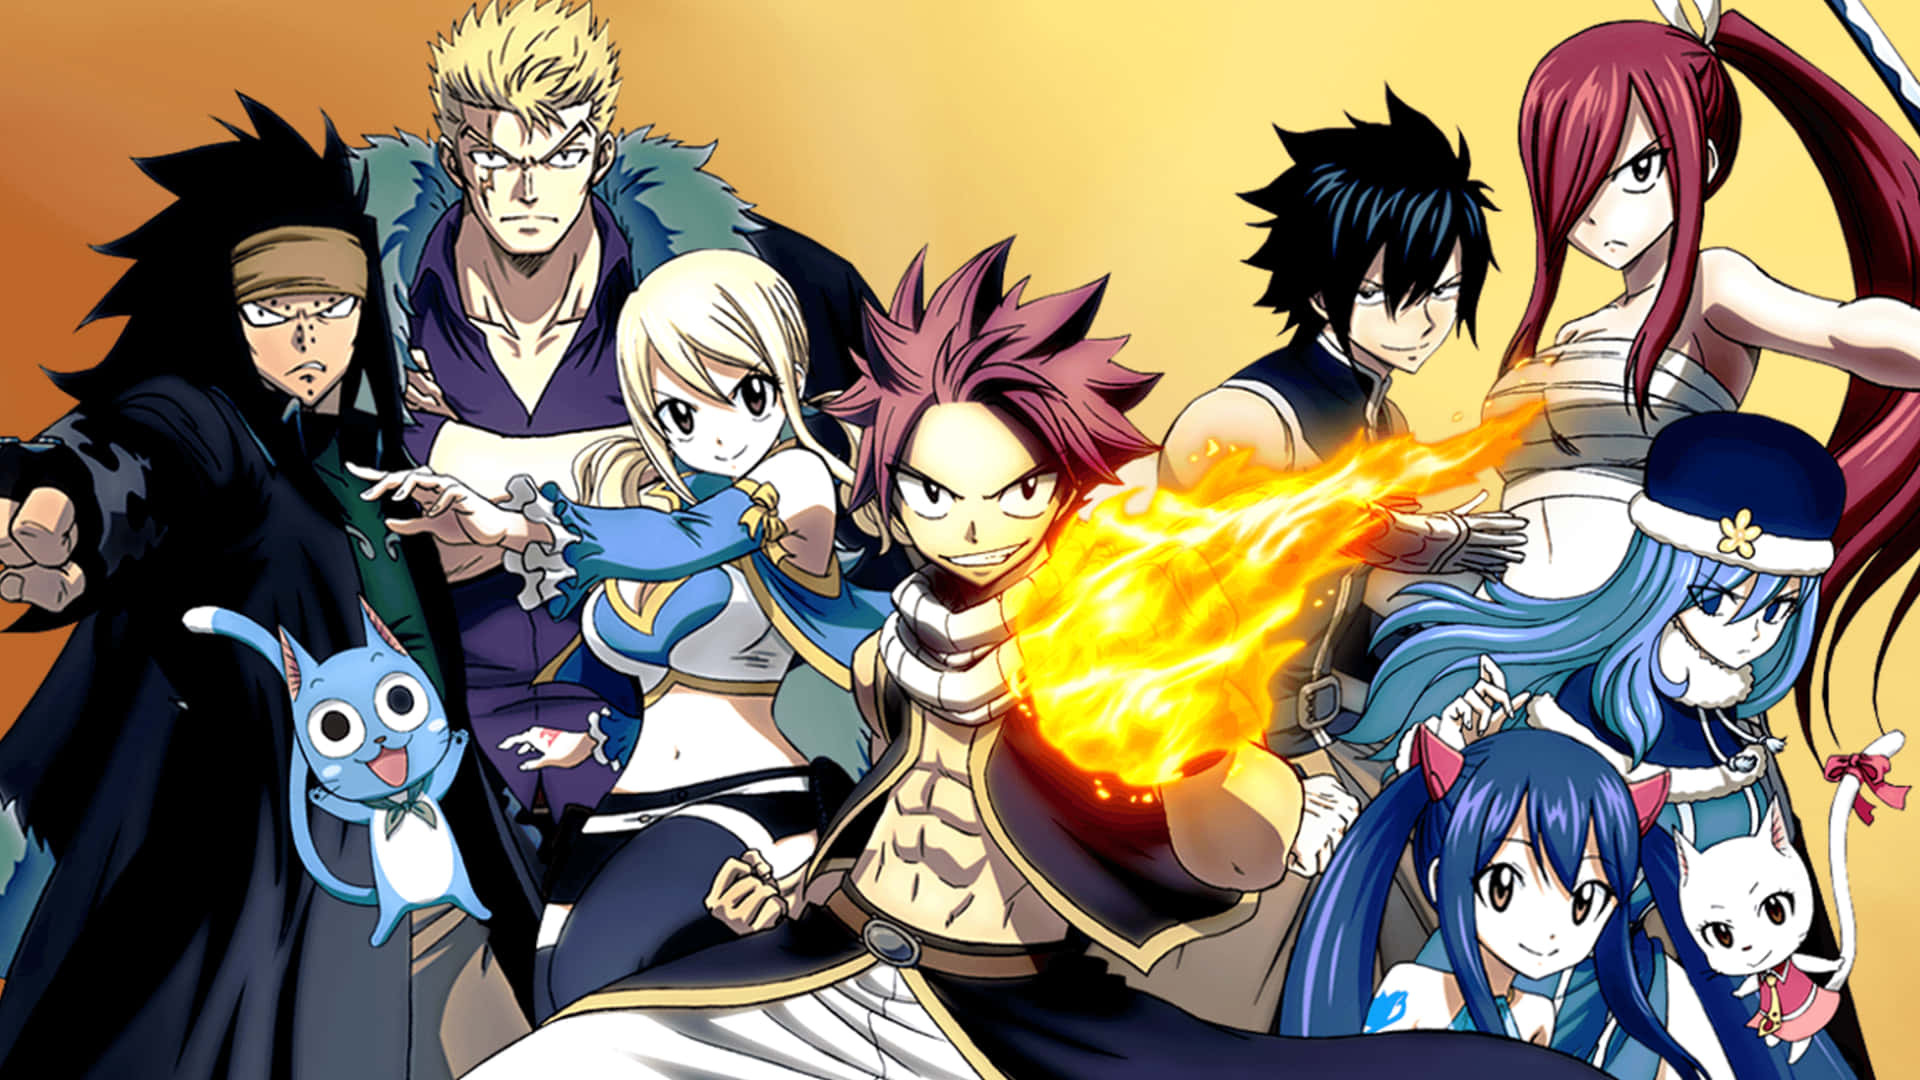 Fairy Tail Background Wallpaper